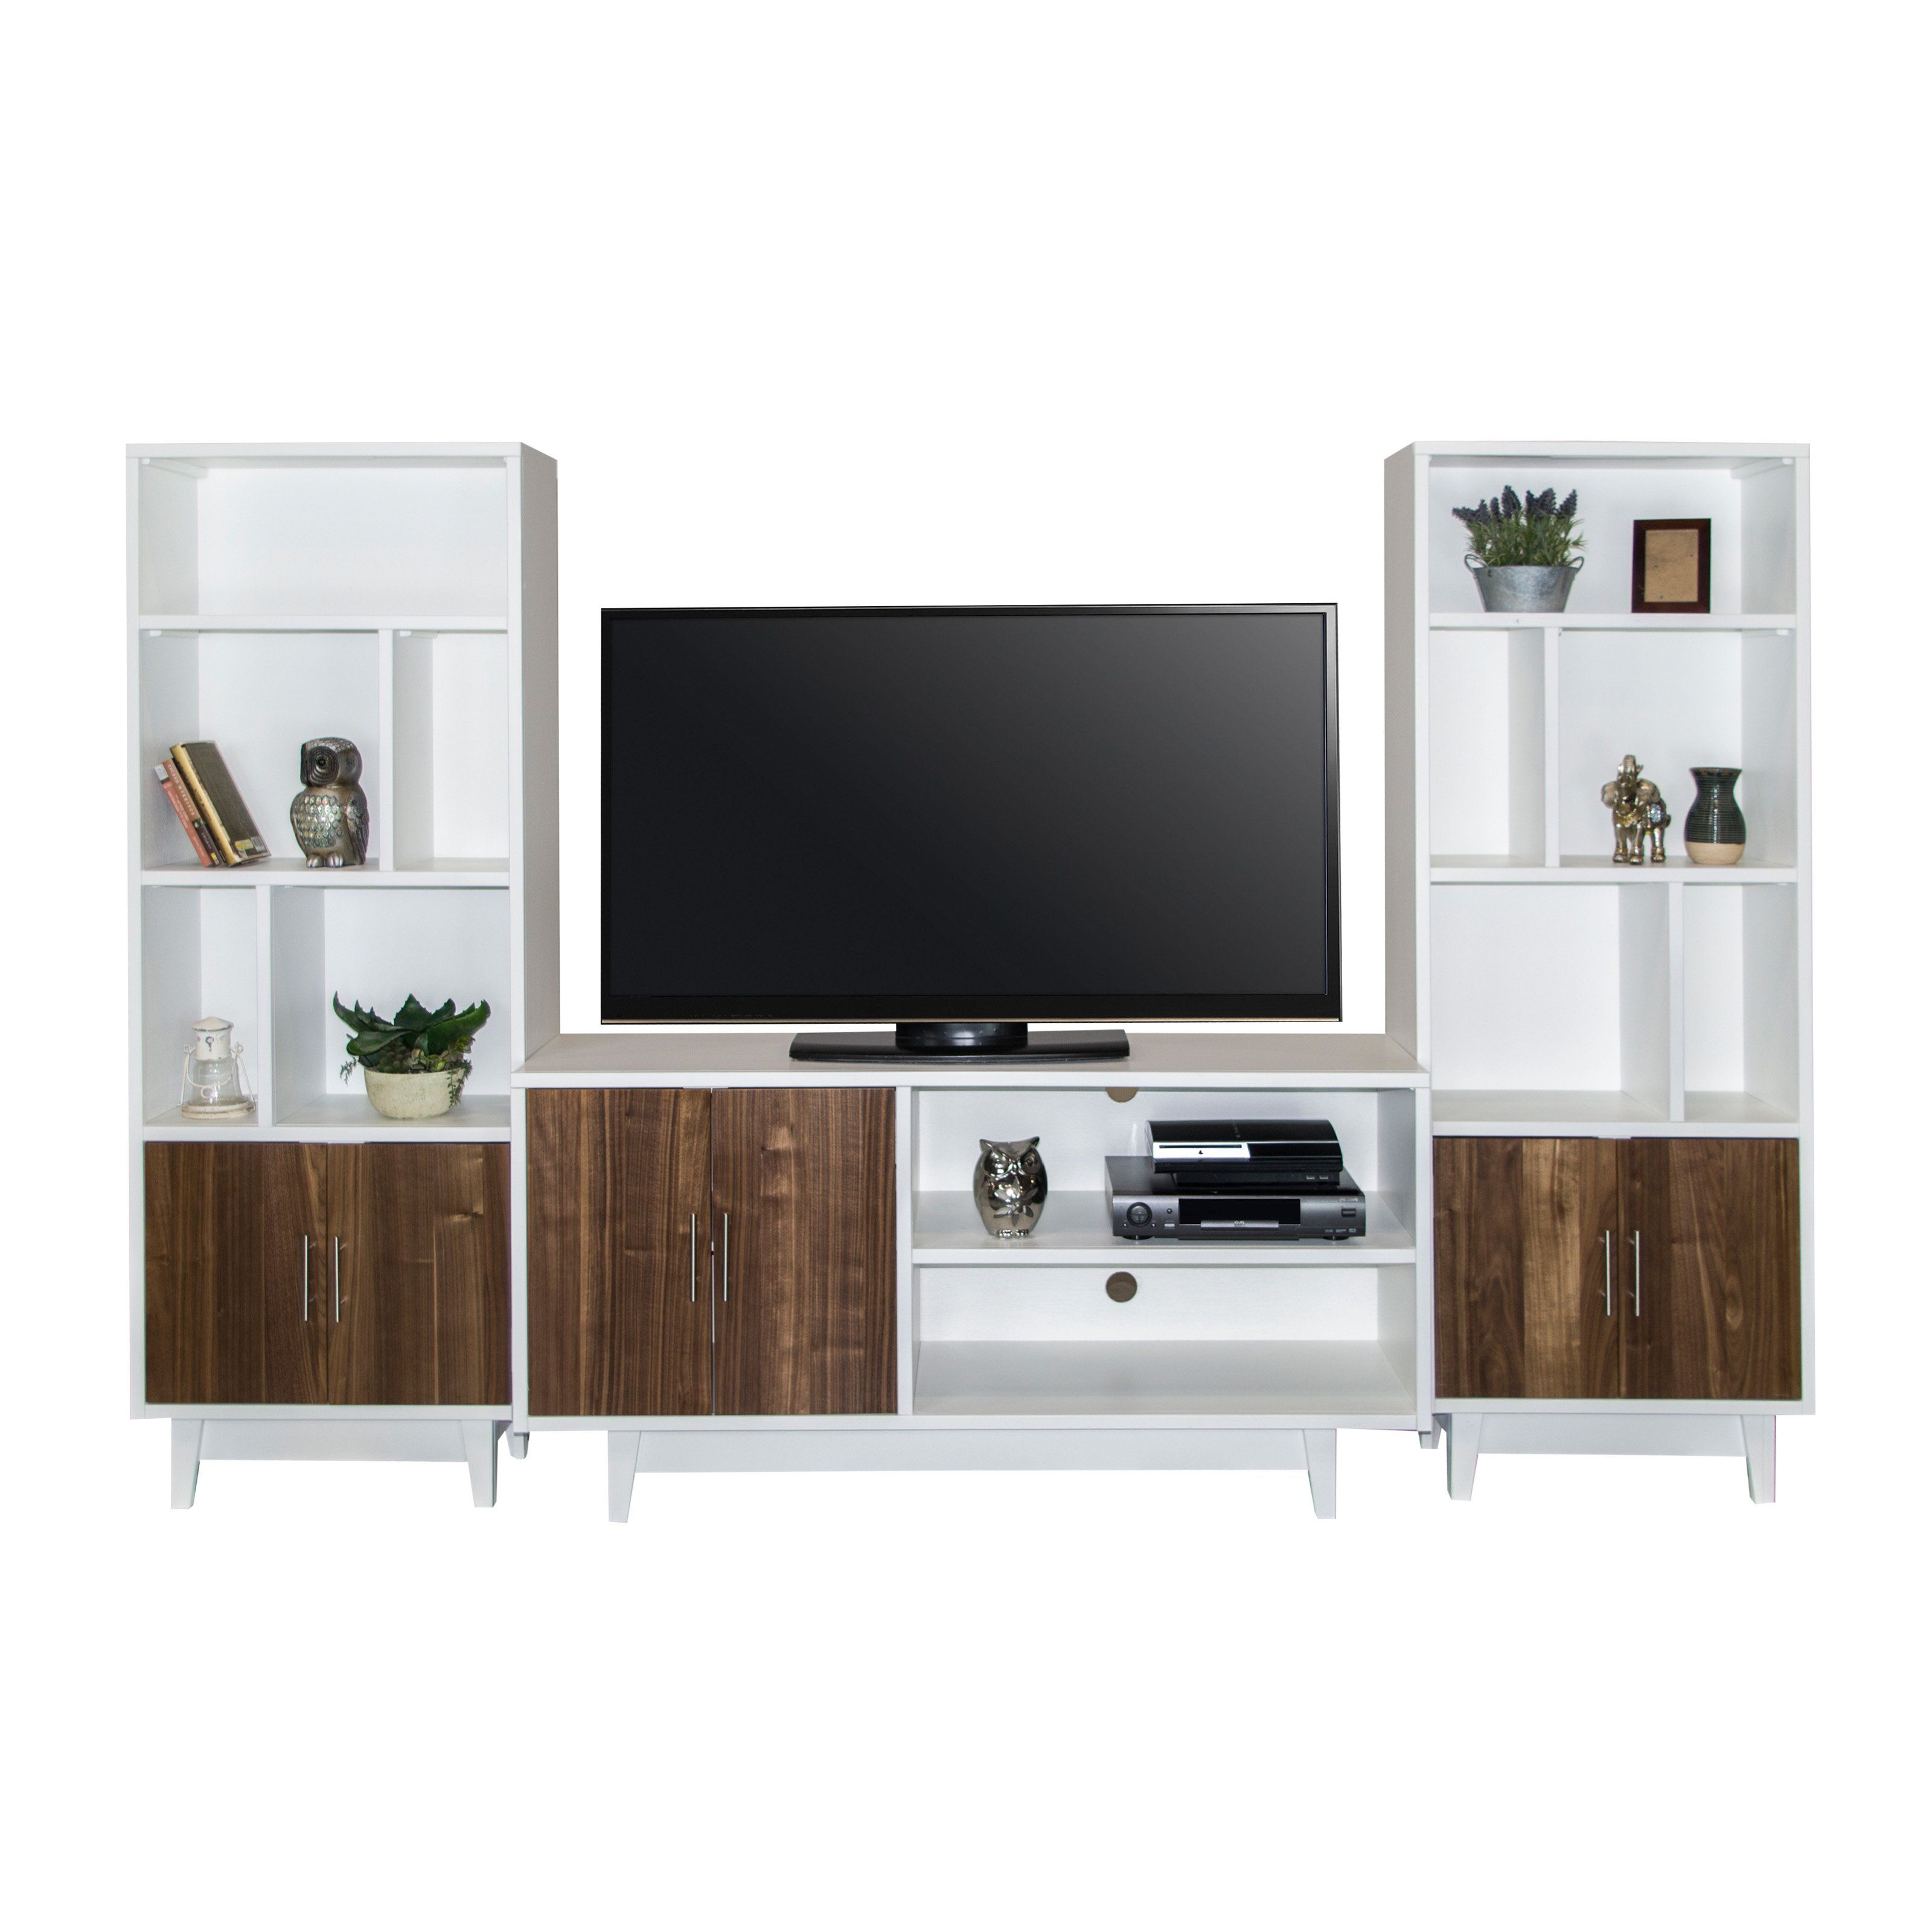 Draper 62 Inch Tv Stands Regarding Fashionable Legends Furniture Draper Contemporary Tv Console With Optional Wall (View 17 of 20)